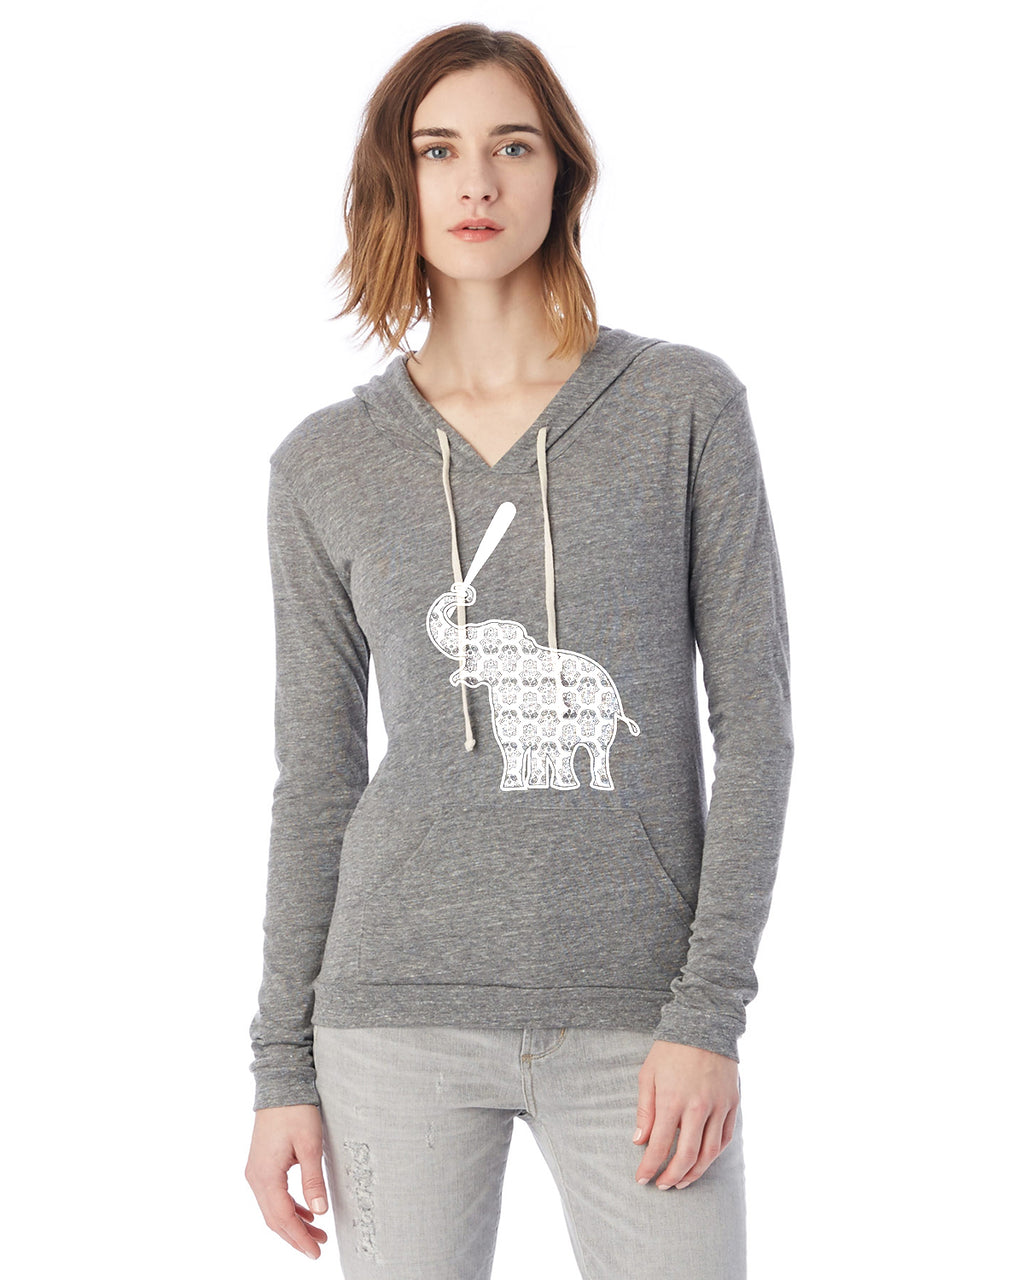 Elephant with Softball Bat Softball Eco Jersey Pullover Hoodie Animal Sports Collection